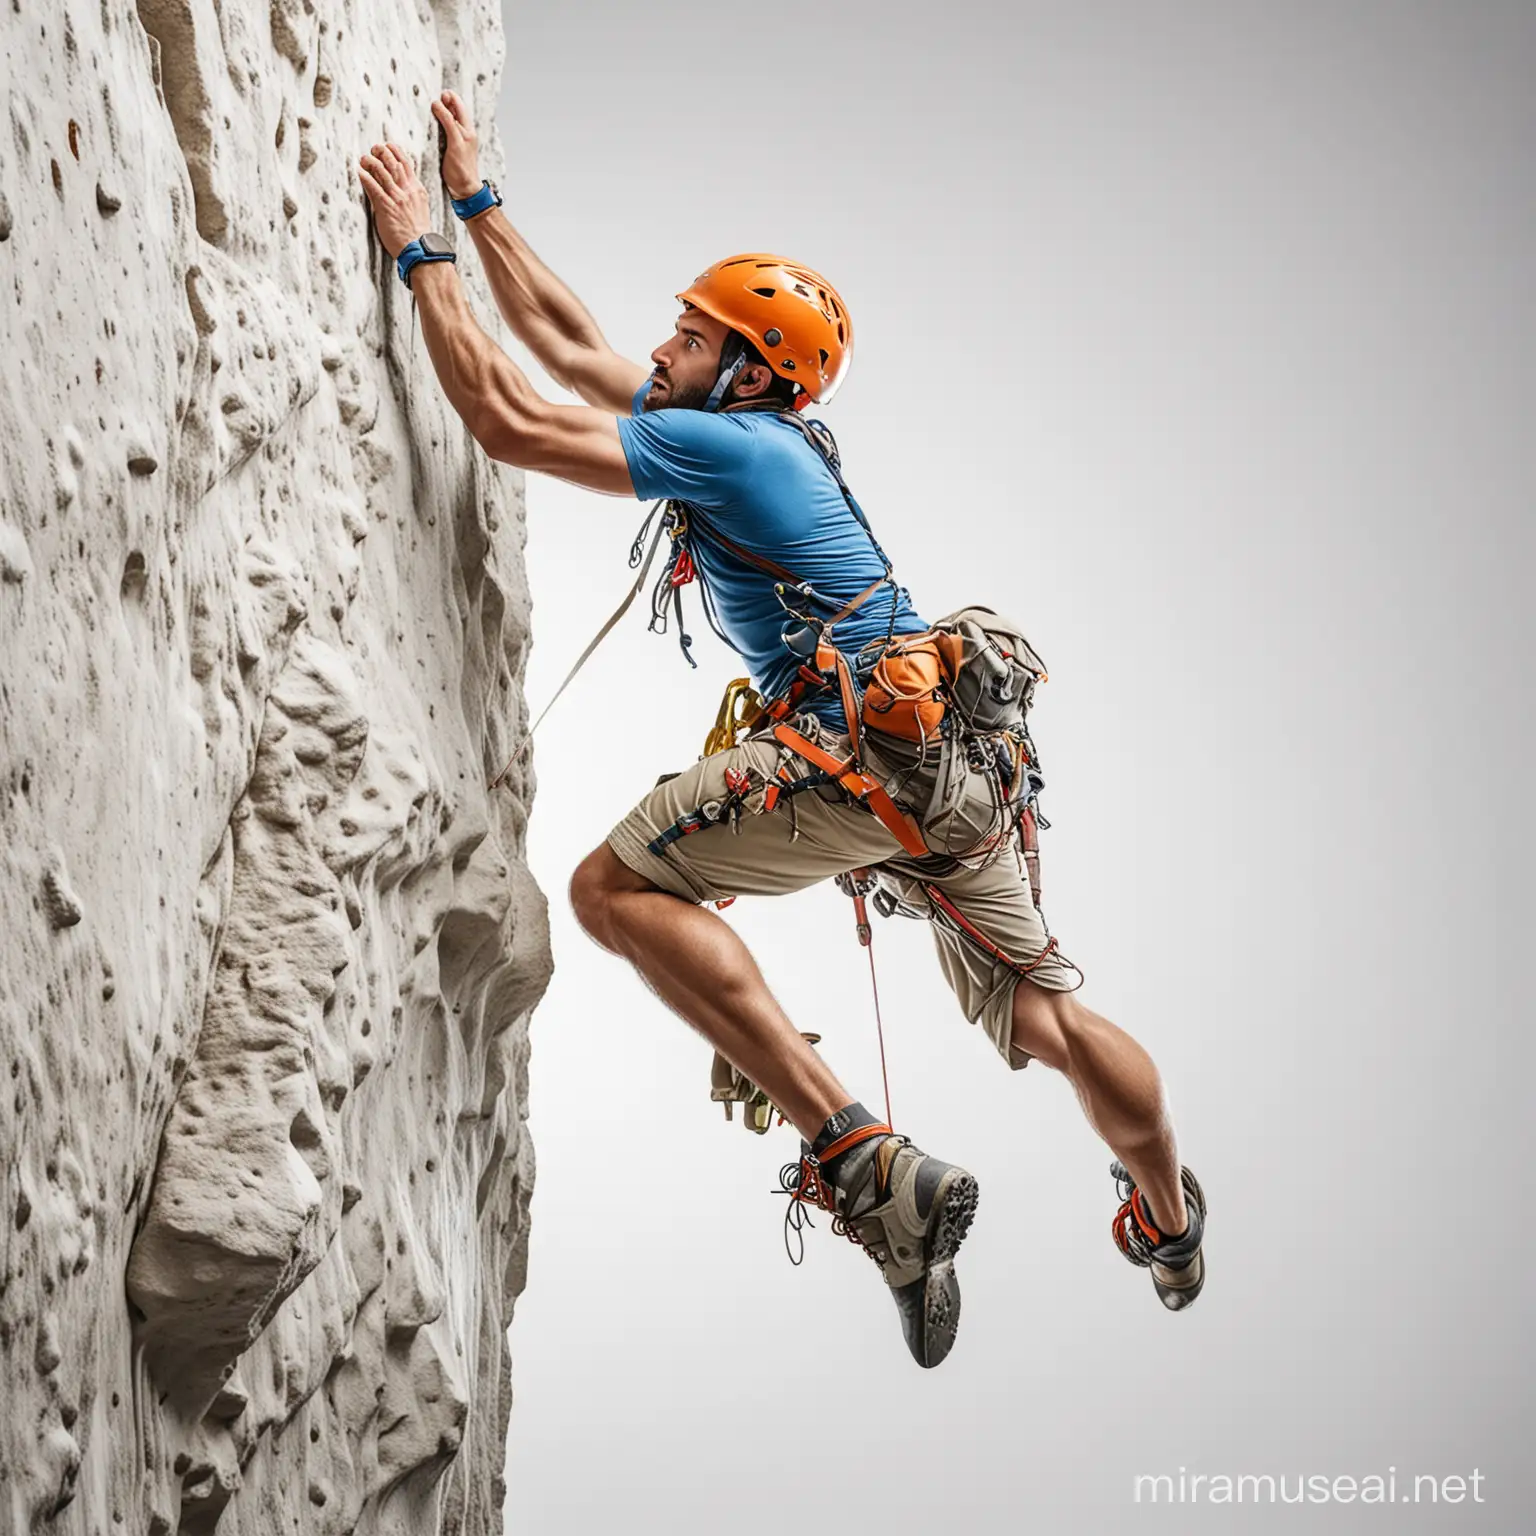 Ambitious Climber with white background
